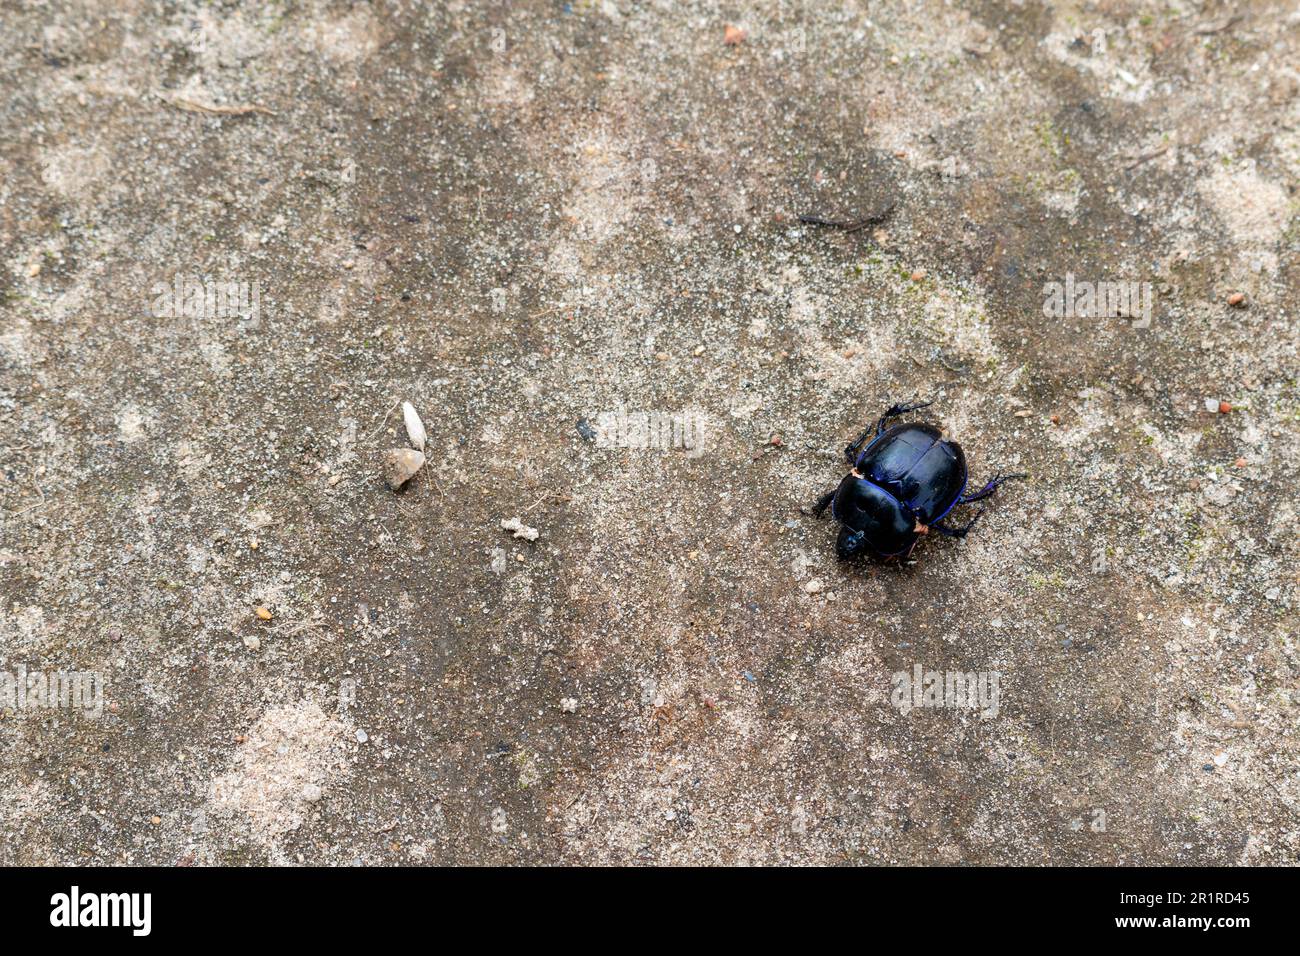 Dung beetle, Geotrupes stercorarius Stock Photo